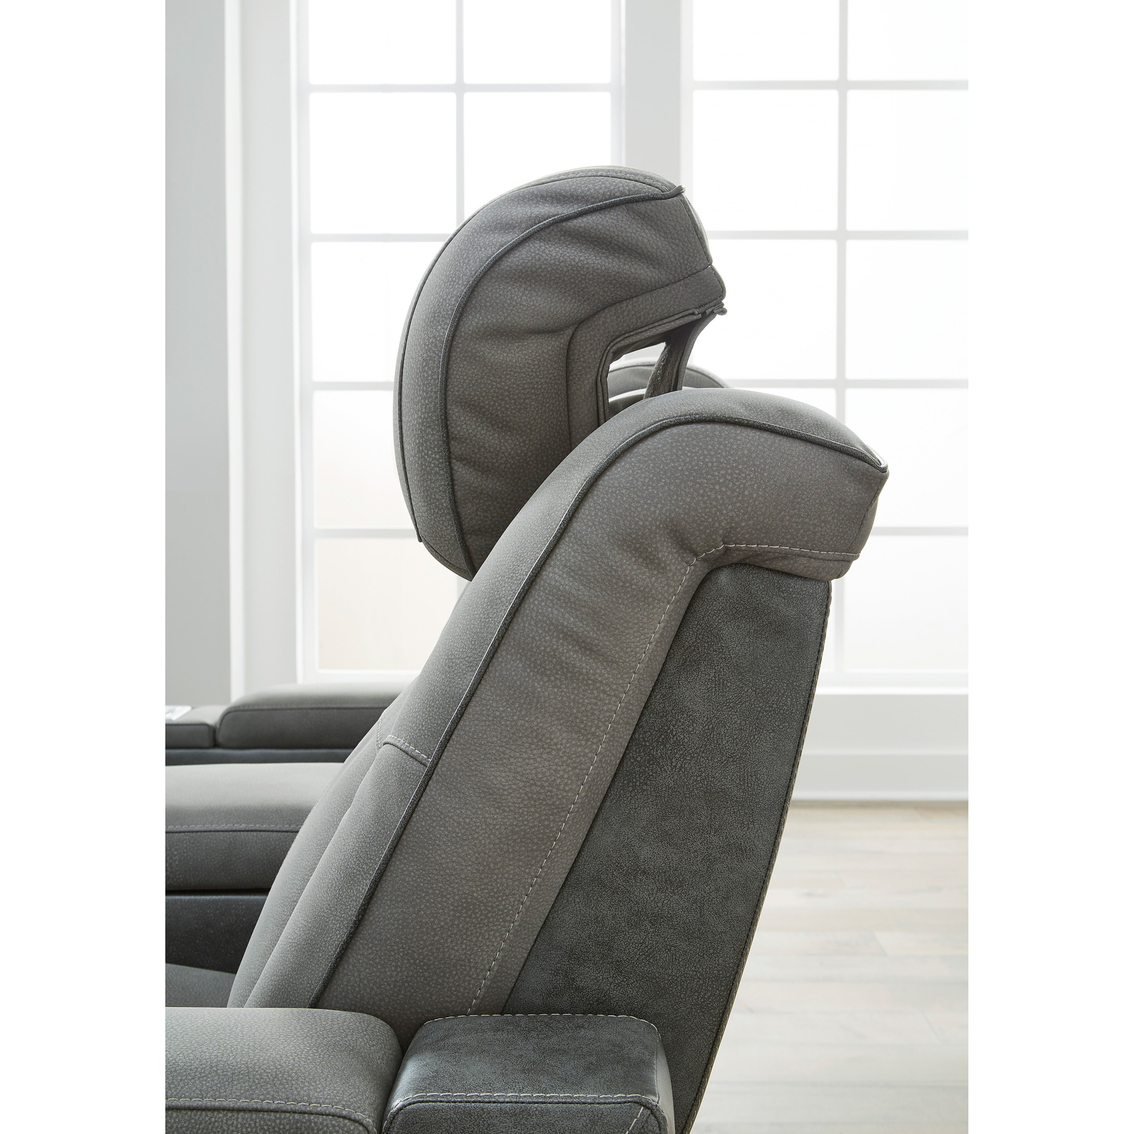 Signature Design by Ashley Next Gen DuraPella Power Reclining Loveseat with Console - Image 7 of 10